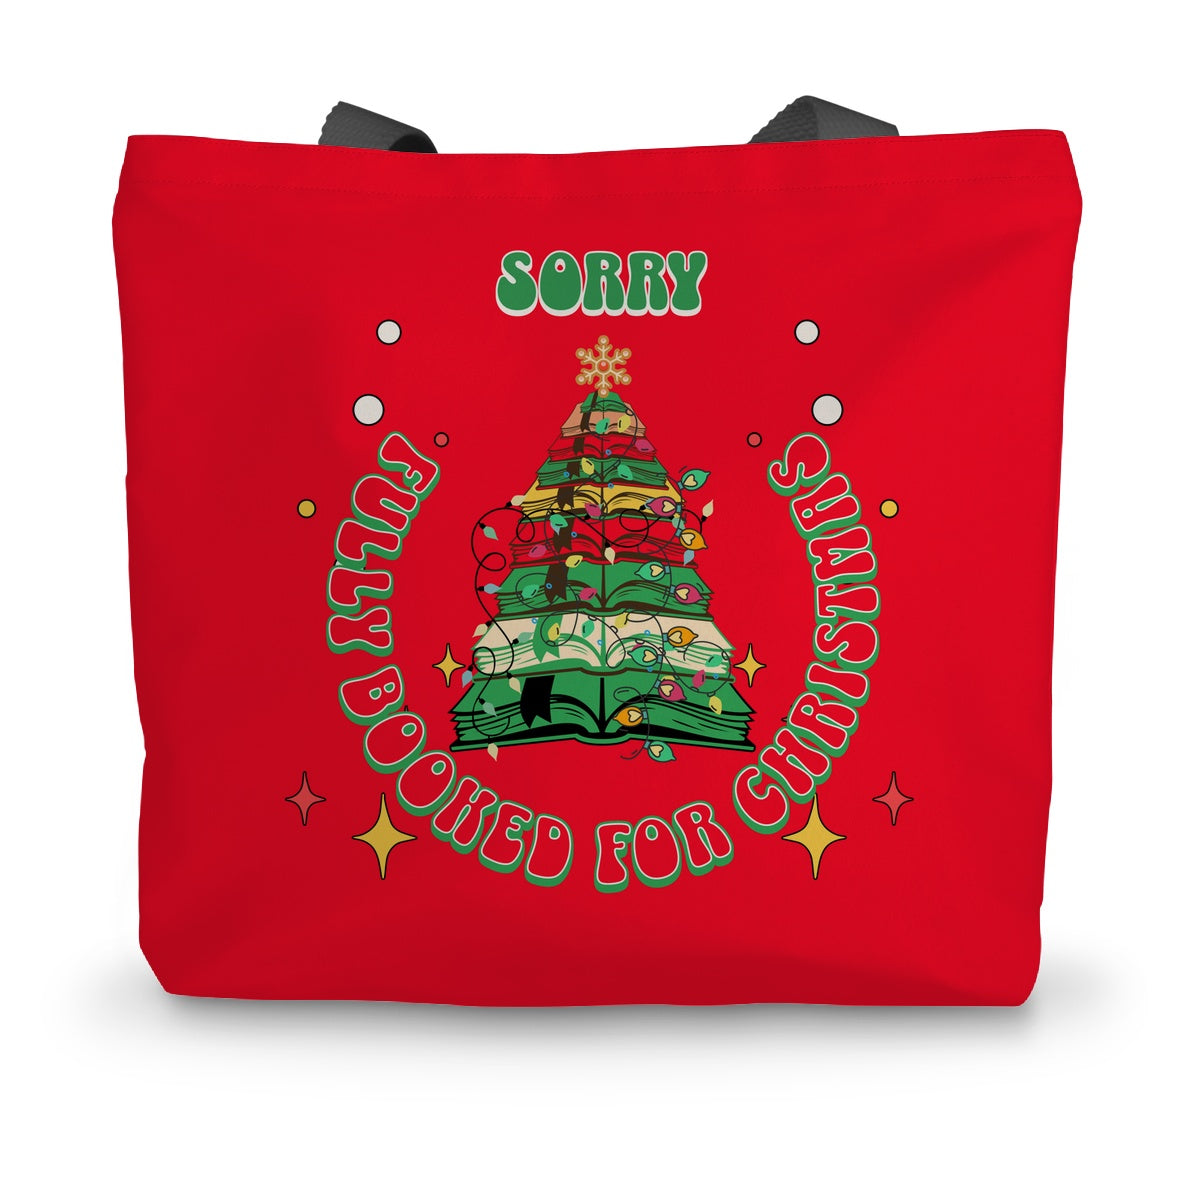 Sorry Fully Booked for Christmas Canvas Tote Bag